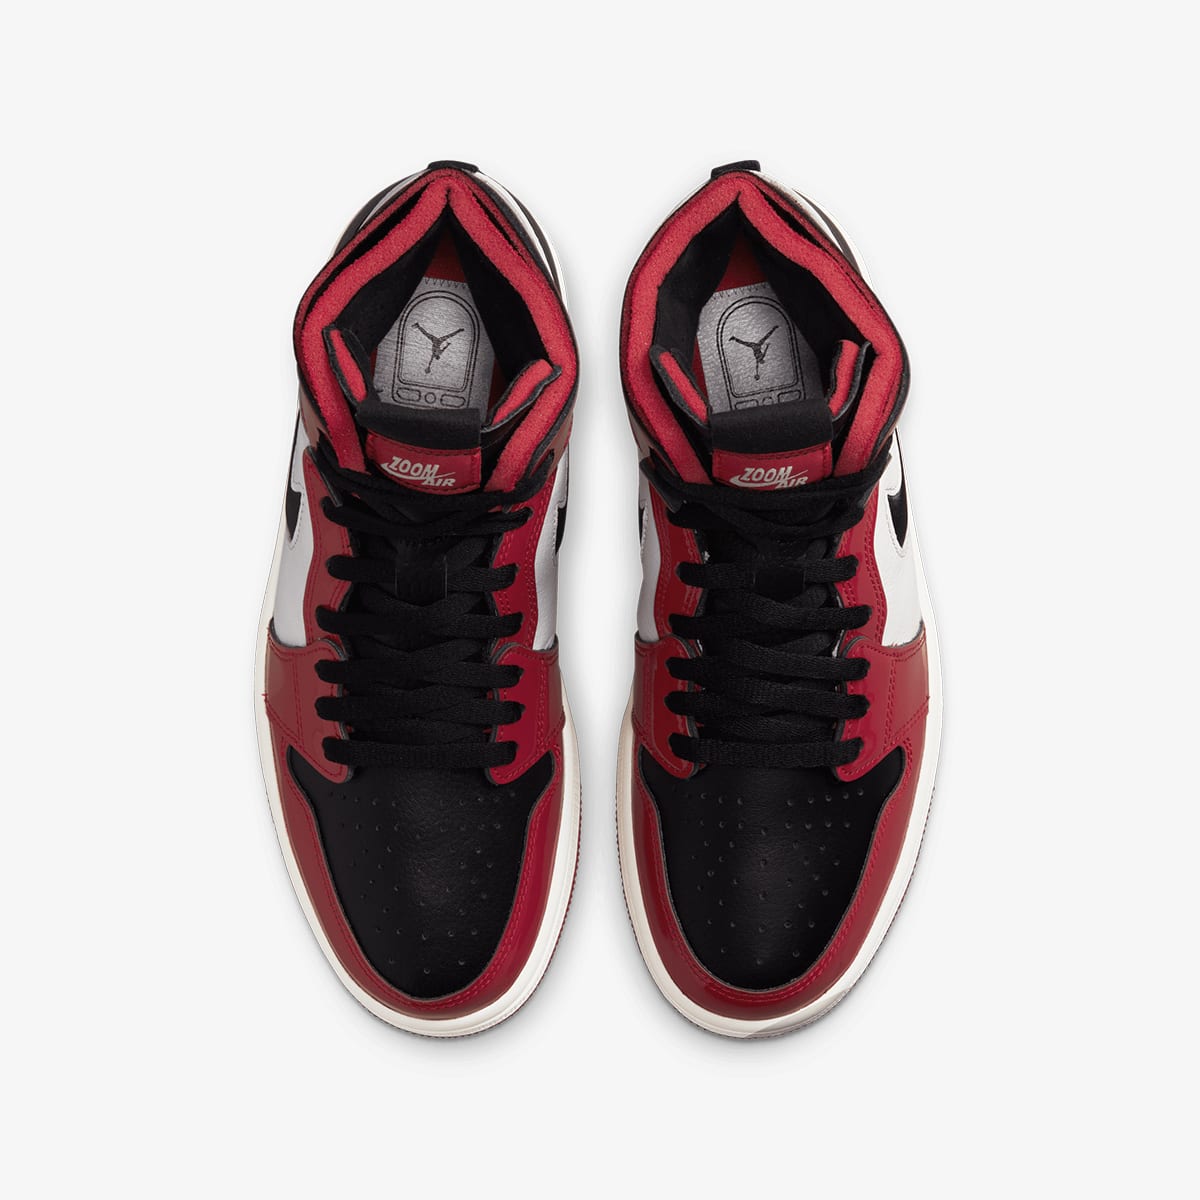 Air Jordan 1 Zoom Comfort W (Black & Red) | END. Launches